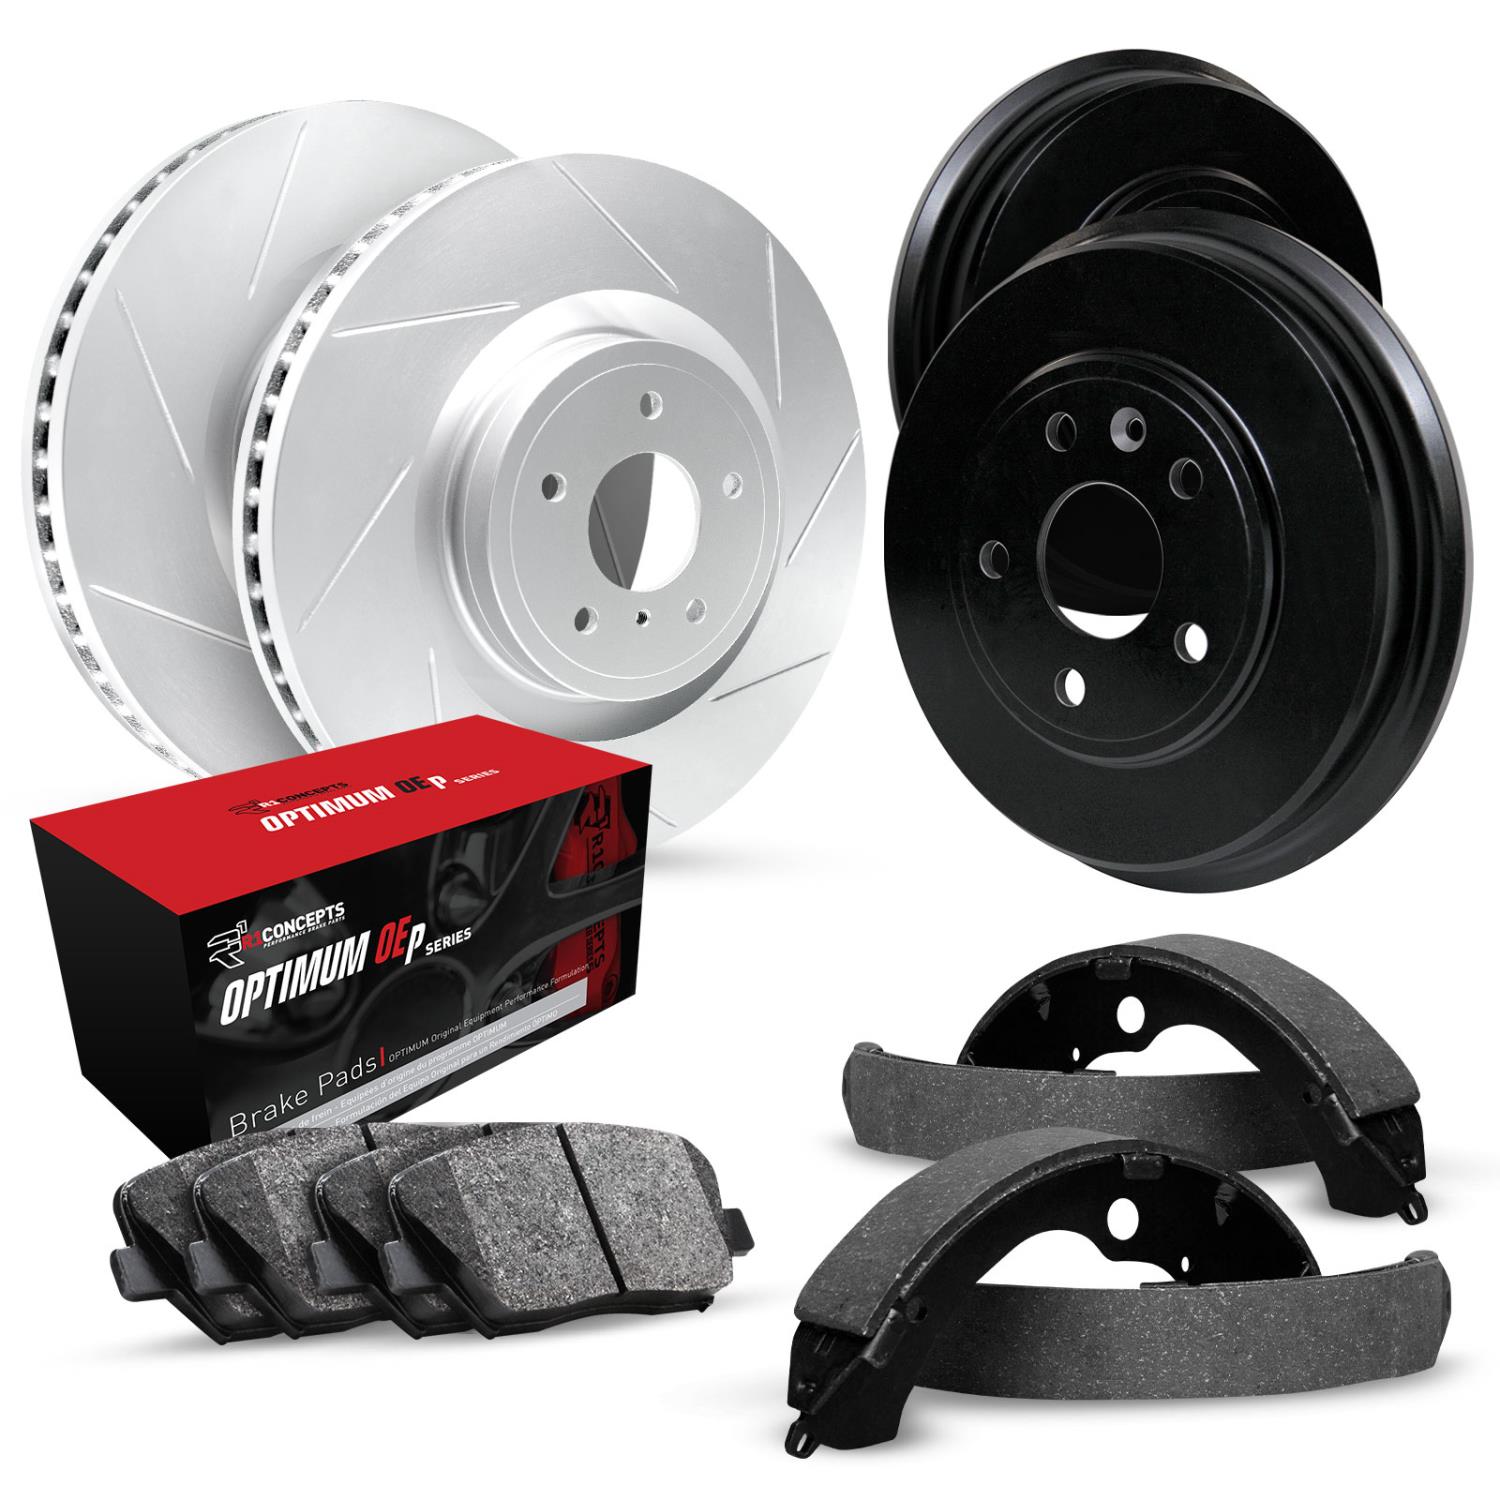 GEO-Carbon Slotted Brake Rotor & Drum Set w/Optimum OE Pads & Shoes, 1987-1988 Lexus/Toyota/Scion, Position: Front & Rear